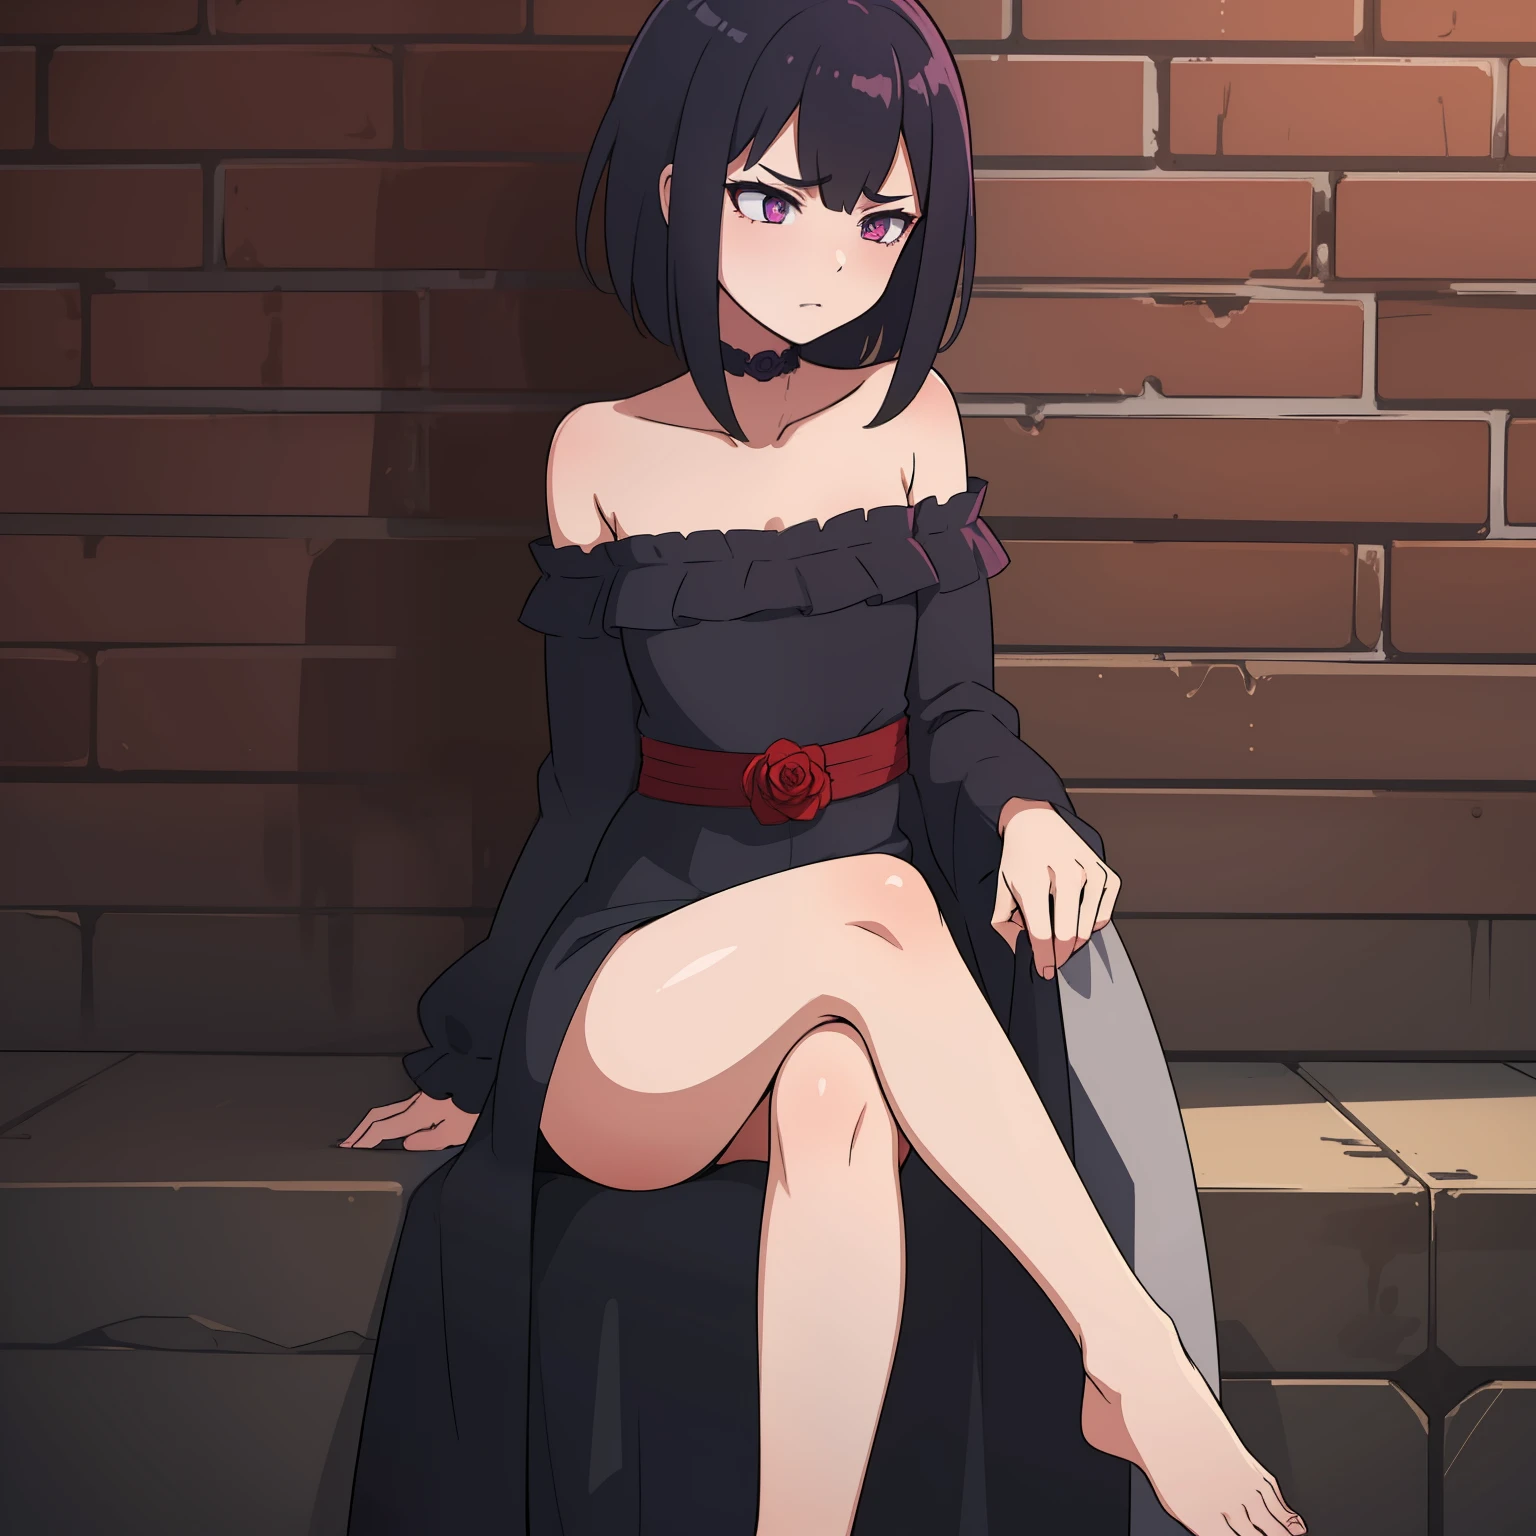 (1 girl) Dark short shoulder-length hair, Emotionless face, quiet look. Little red rose in hair, dark purple eyes, bare feet, Dark gothic outfit. Sitting on a horrible dark throne against the backdrop of a gloomy brick wall